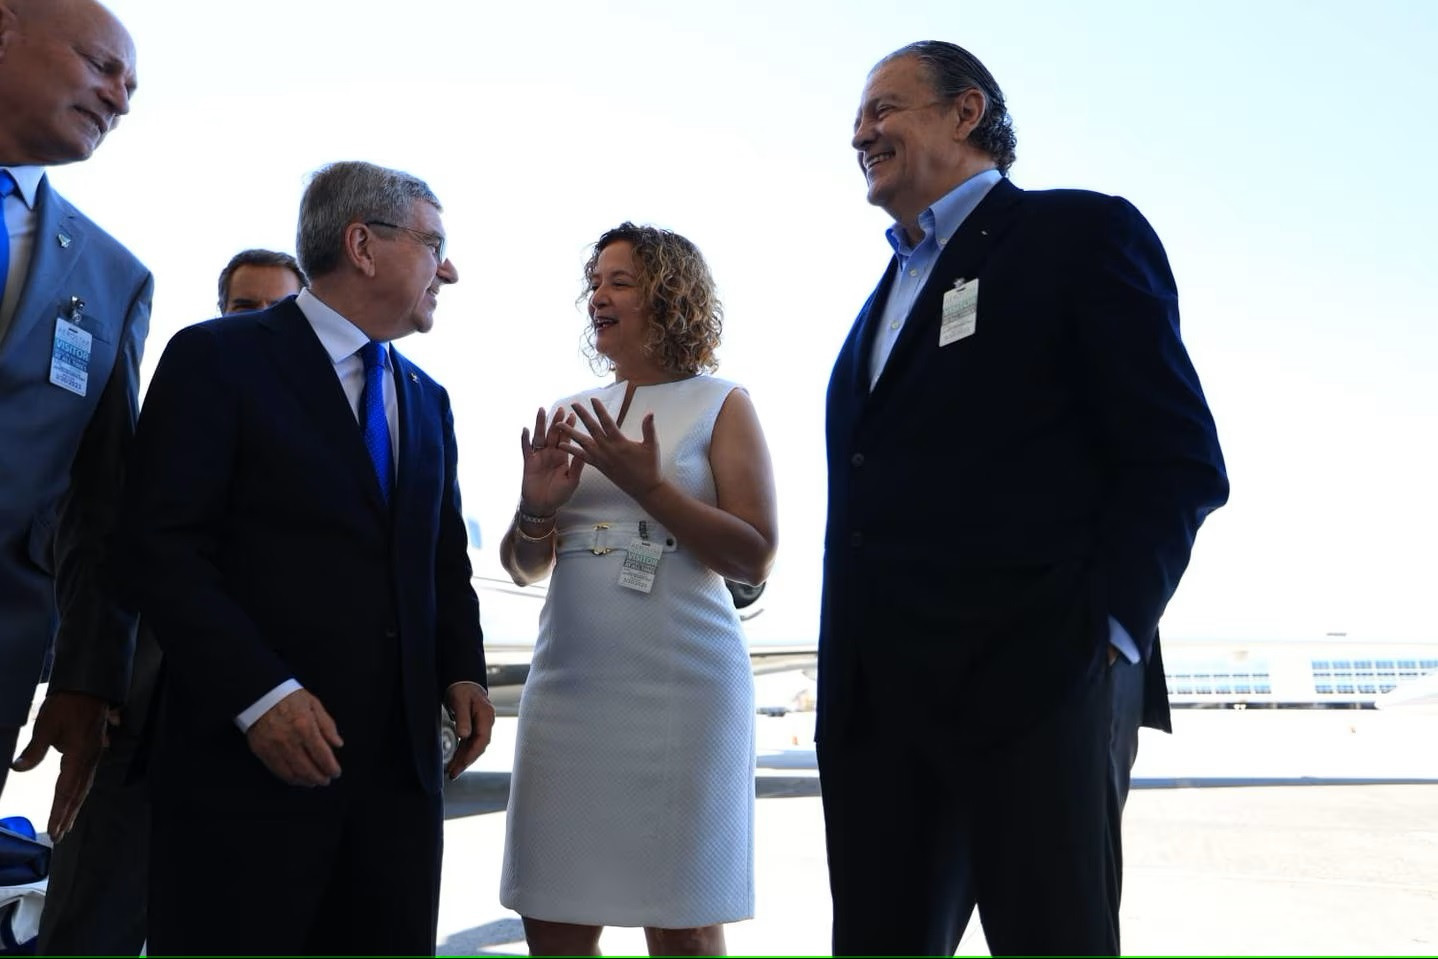 Thomas Bach, left, is greeted on his arrival in Puerto Rico by COPUR President Sara Rosario and IOC member Richard Carrion, right ©Puerto Rico NOC